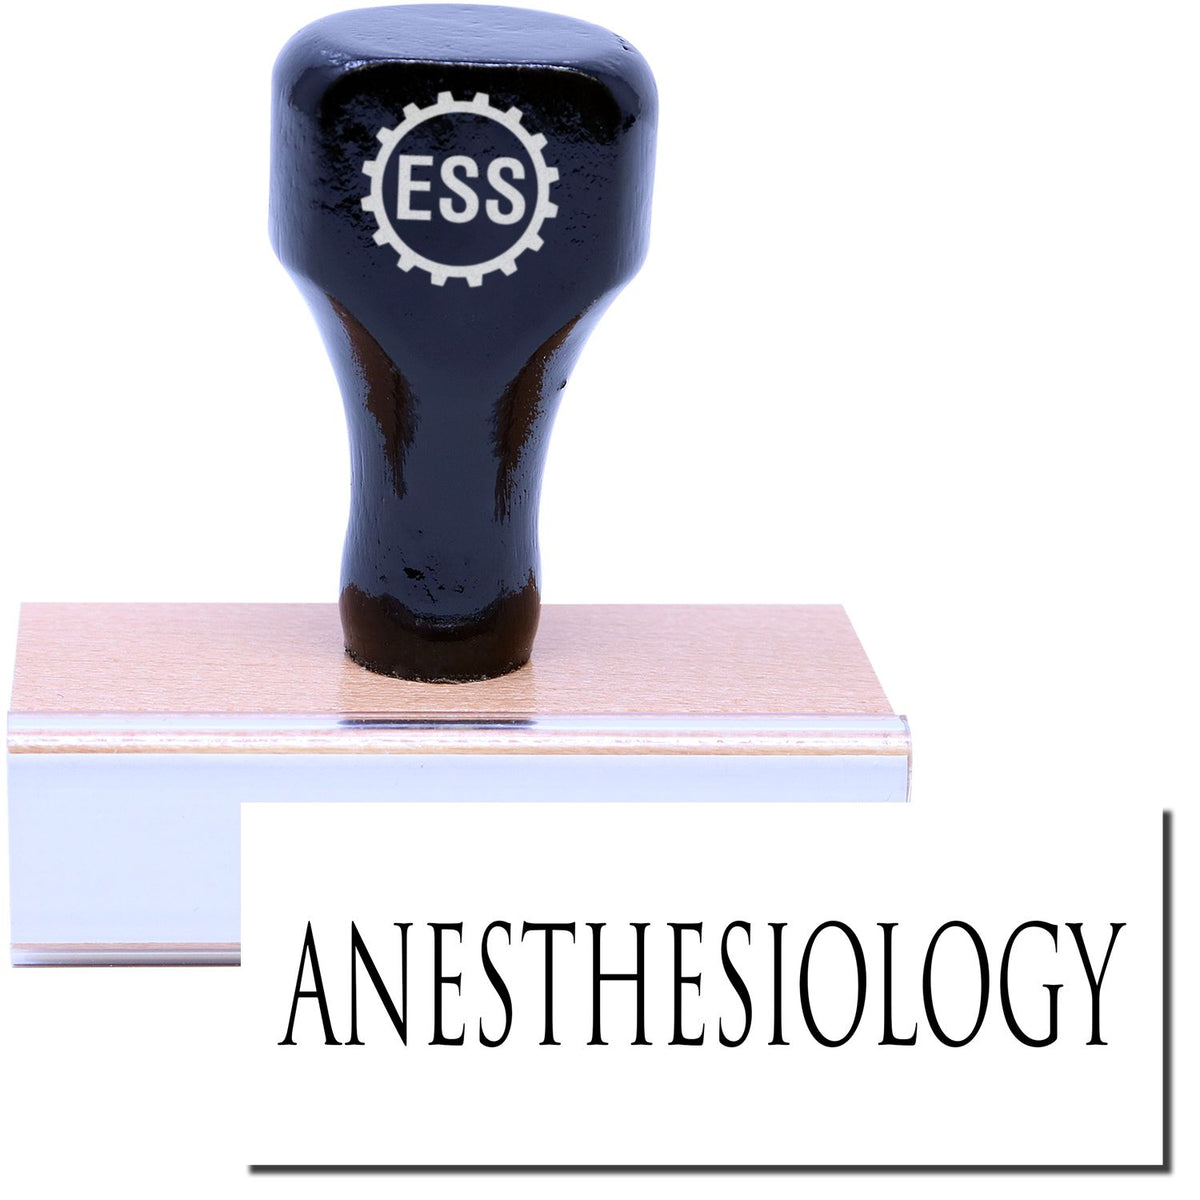 A stock office rubber stamp with a stamped image showing how the text &quot;ANESTHESIOLOGY&quot; in a large font is displayed after stamping.